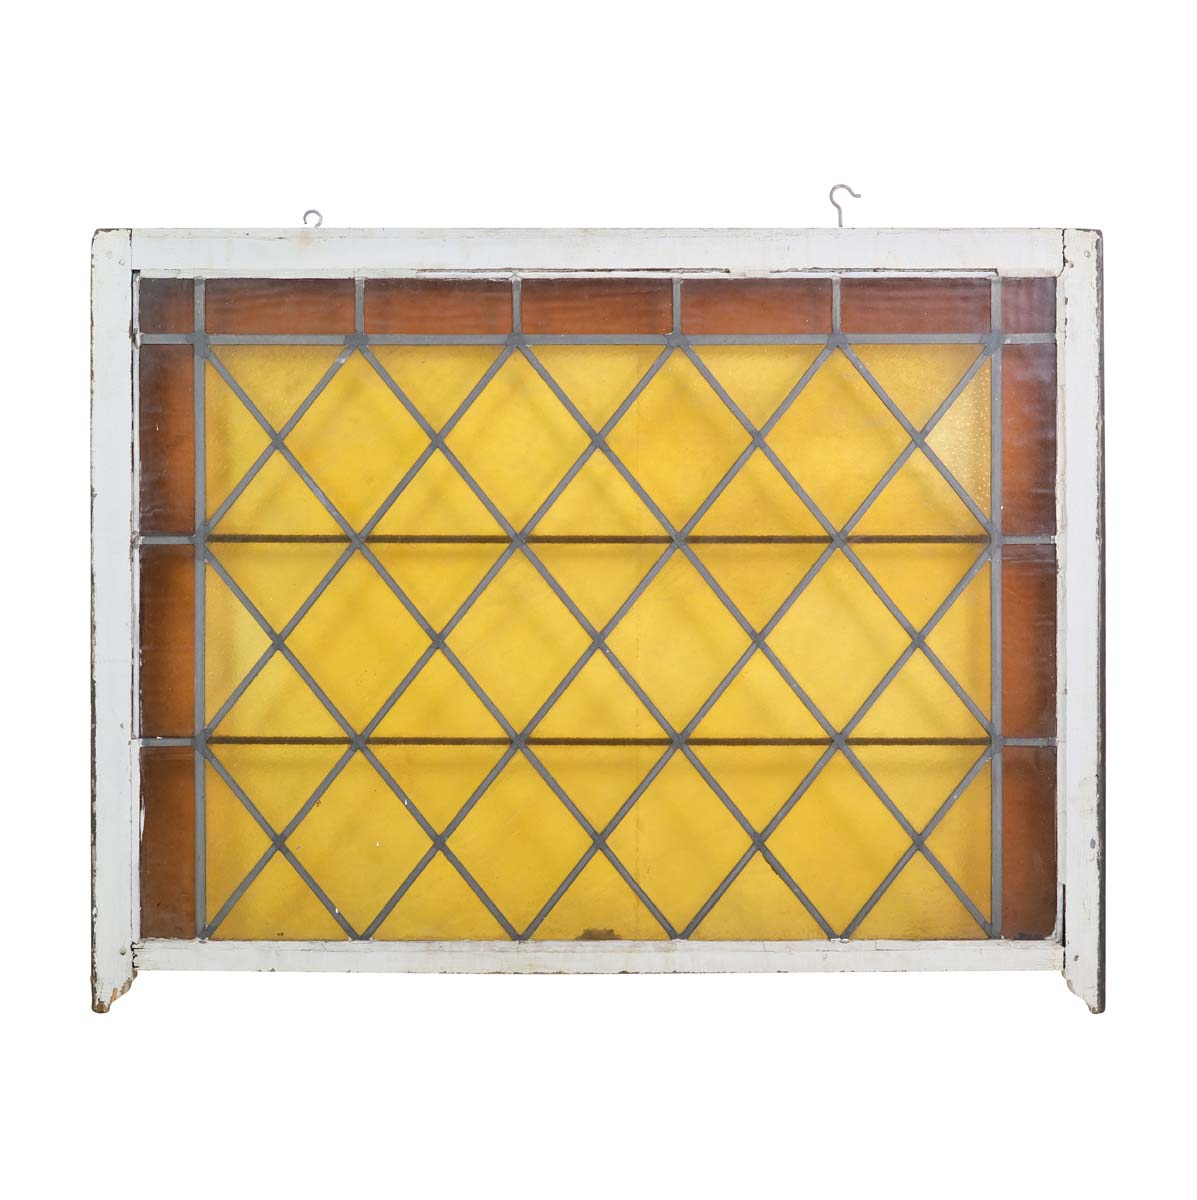 https://ogtstore.com/wp-content/uploads/2022/08/stained-glass-queen-anne-yellow-amber-stained-glass-pine-frame-window-q277195.jpg